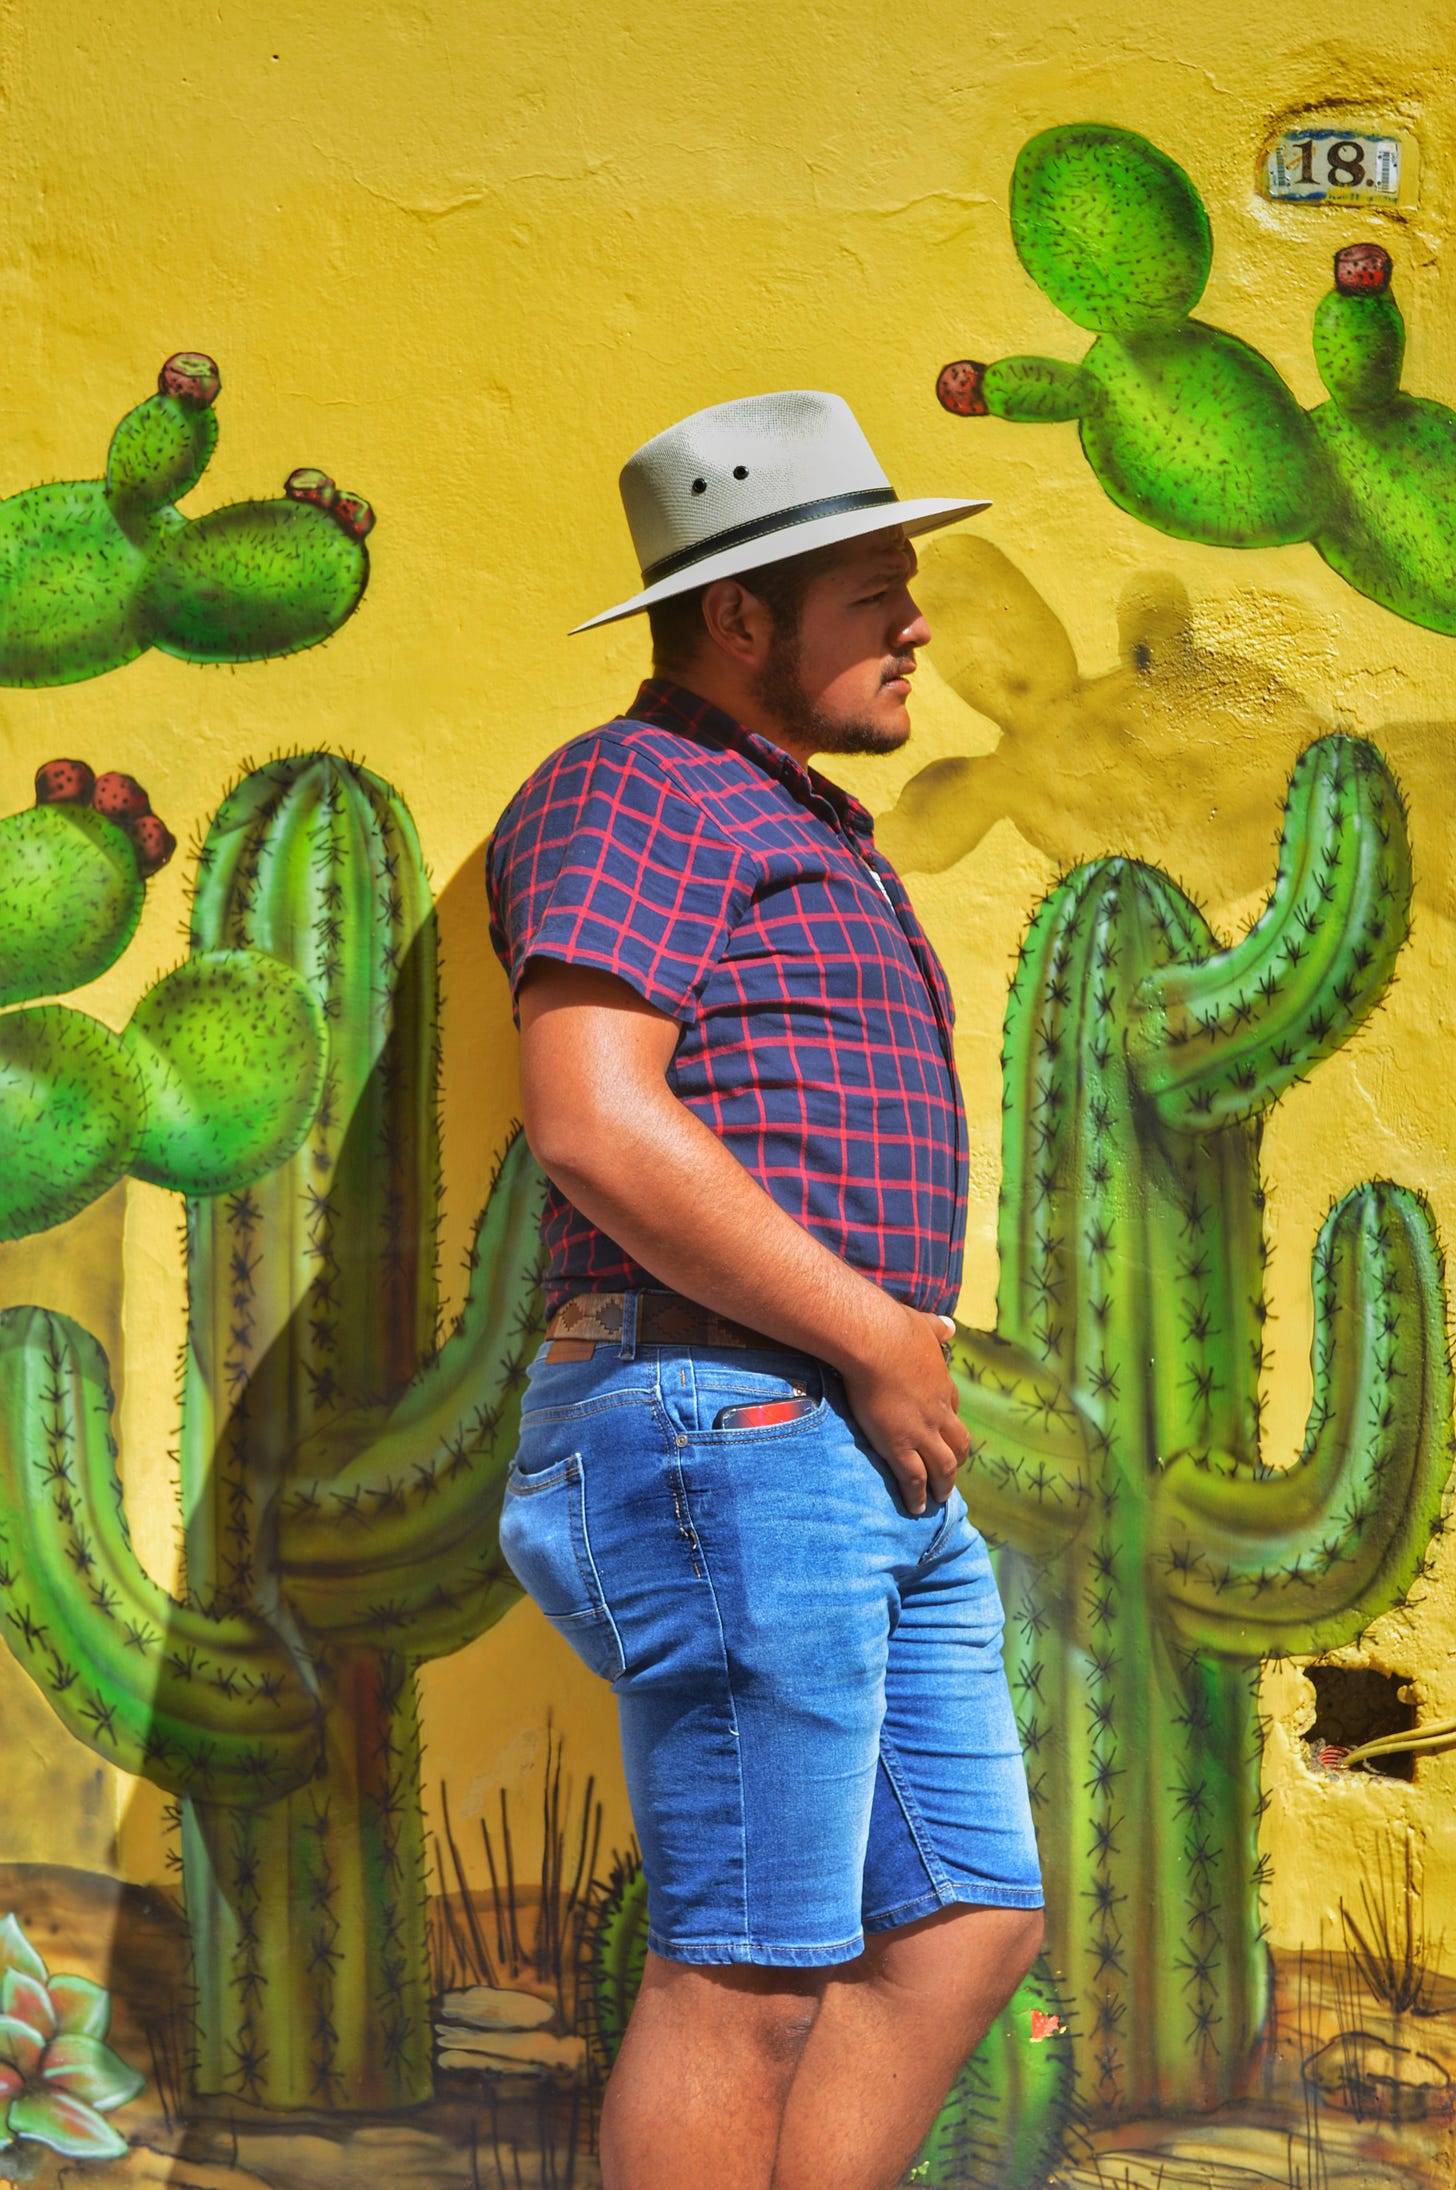 Cool dude wearing awesome shorts standing against a yellow wall with murals of cacti 